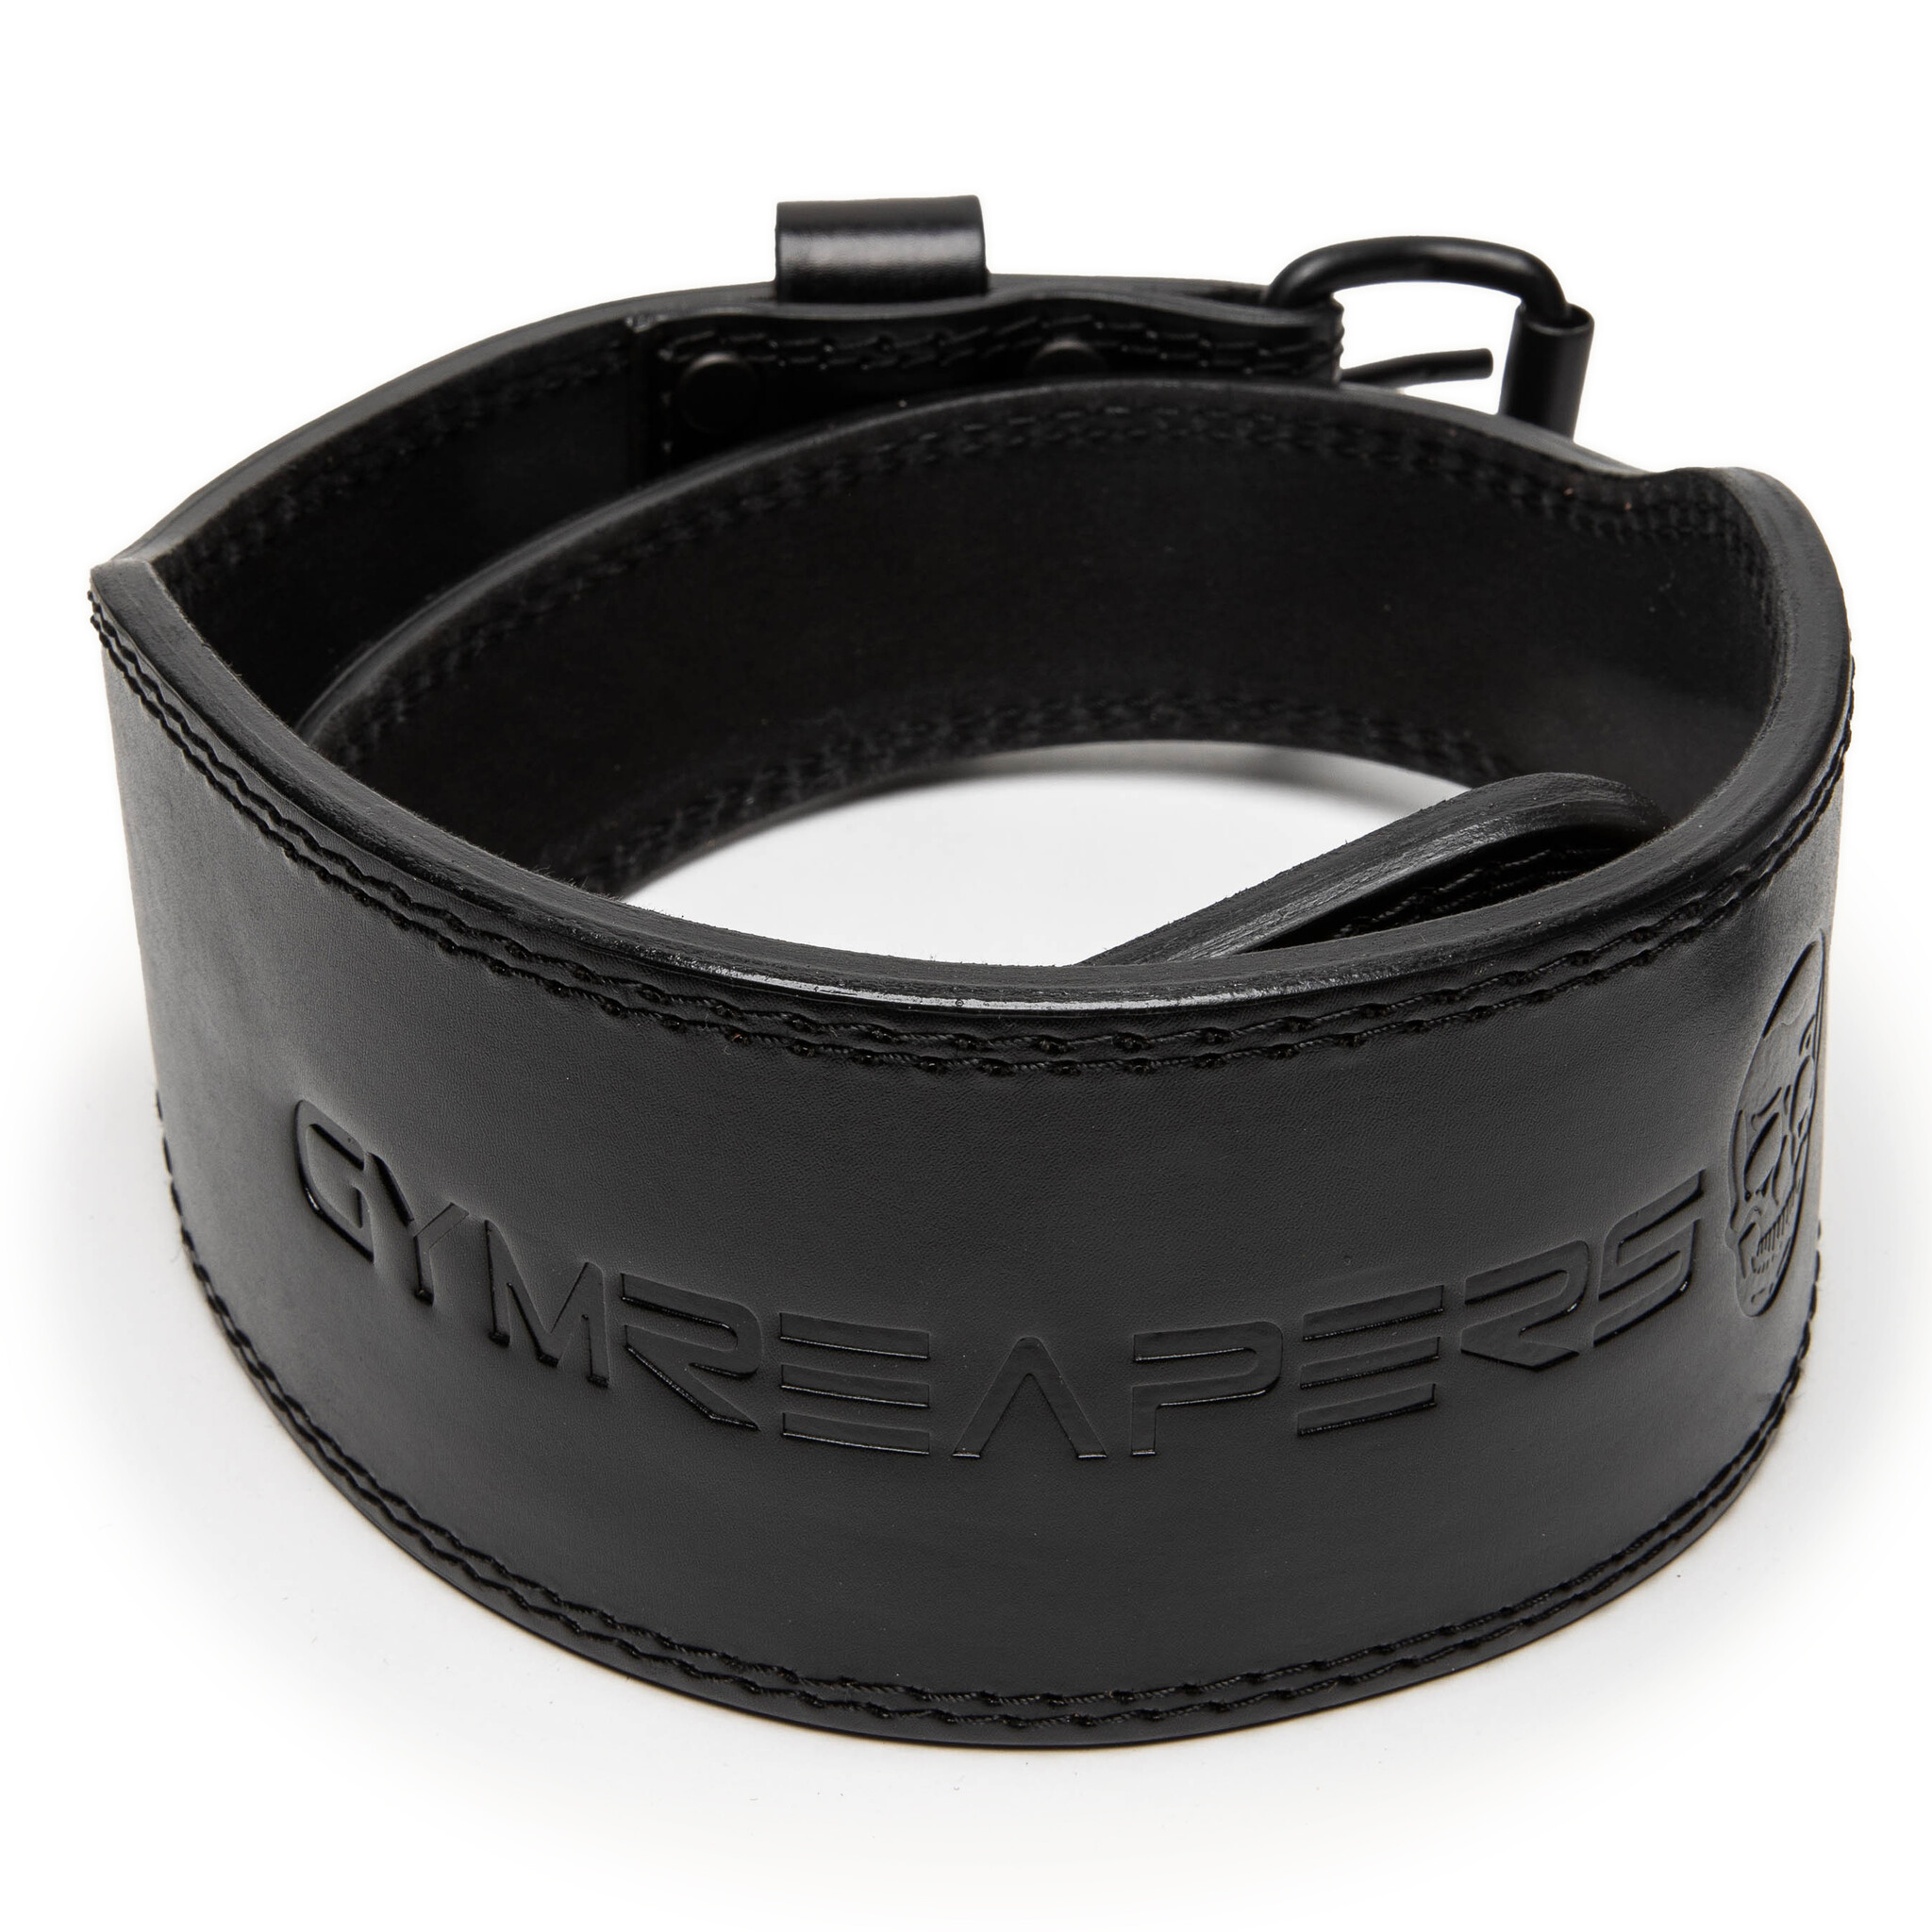 Gymreapers Weightlifting Belt, 7mm Leather Black